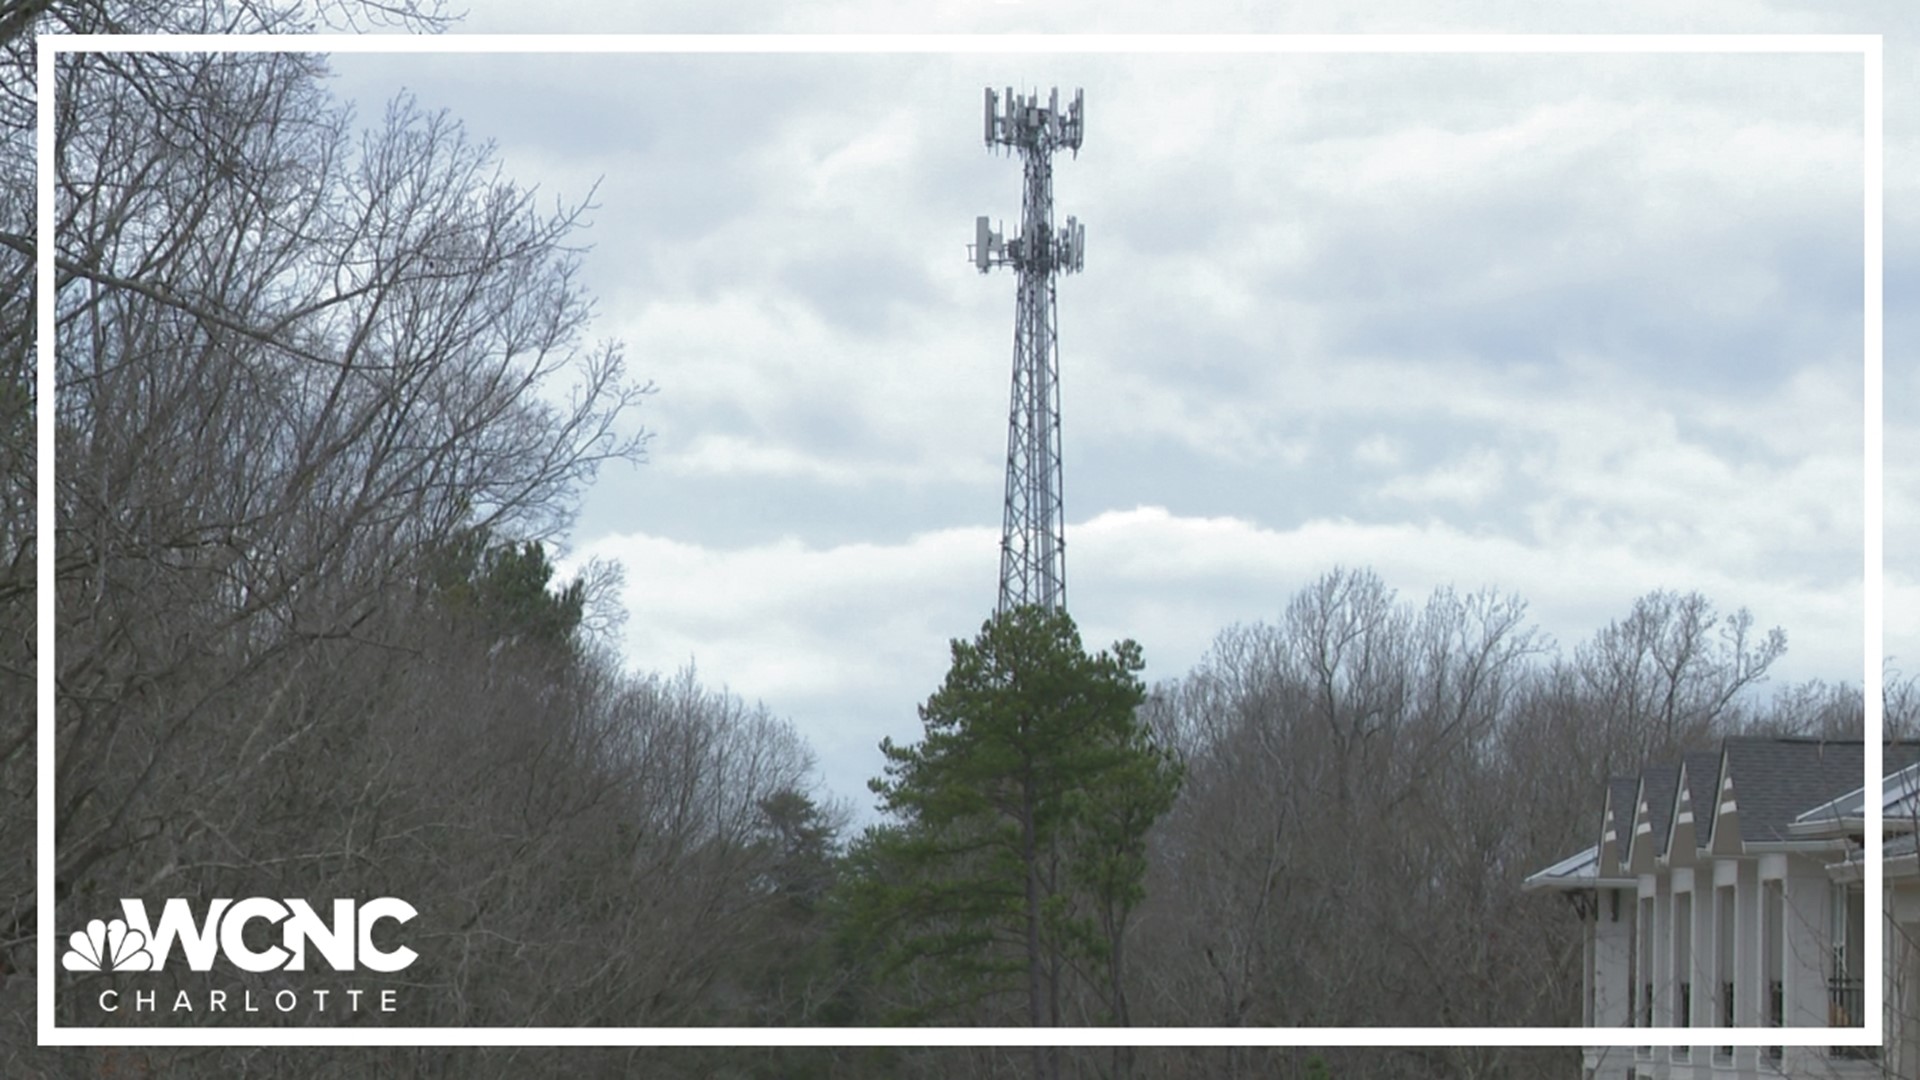 The City of Charlotte is installing a new radio signal tower that is expected to fix the issue once it comes online in mid-March.